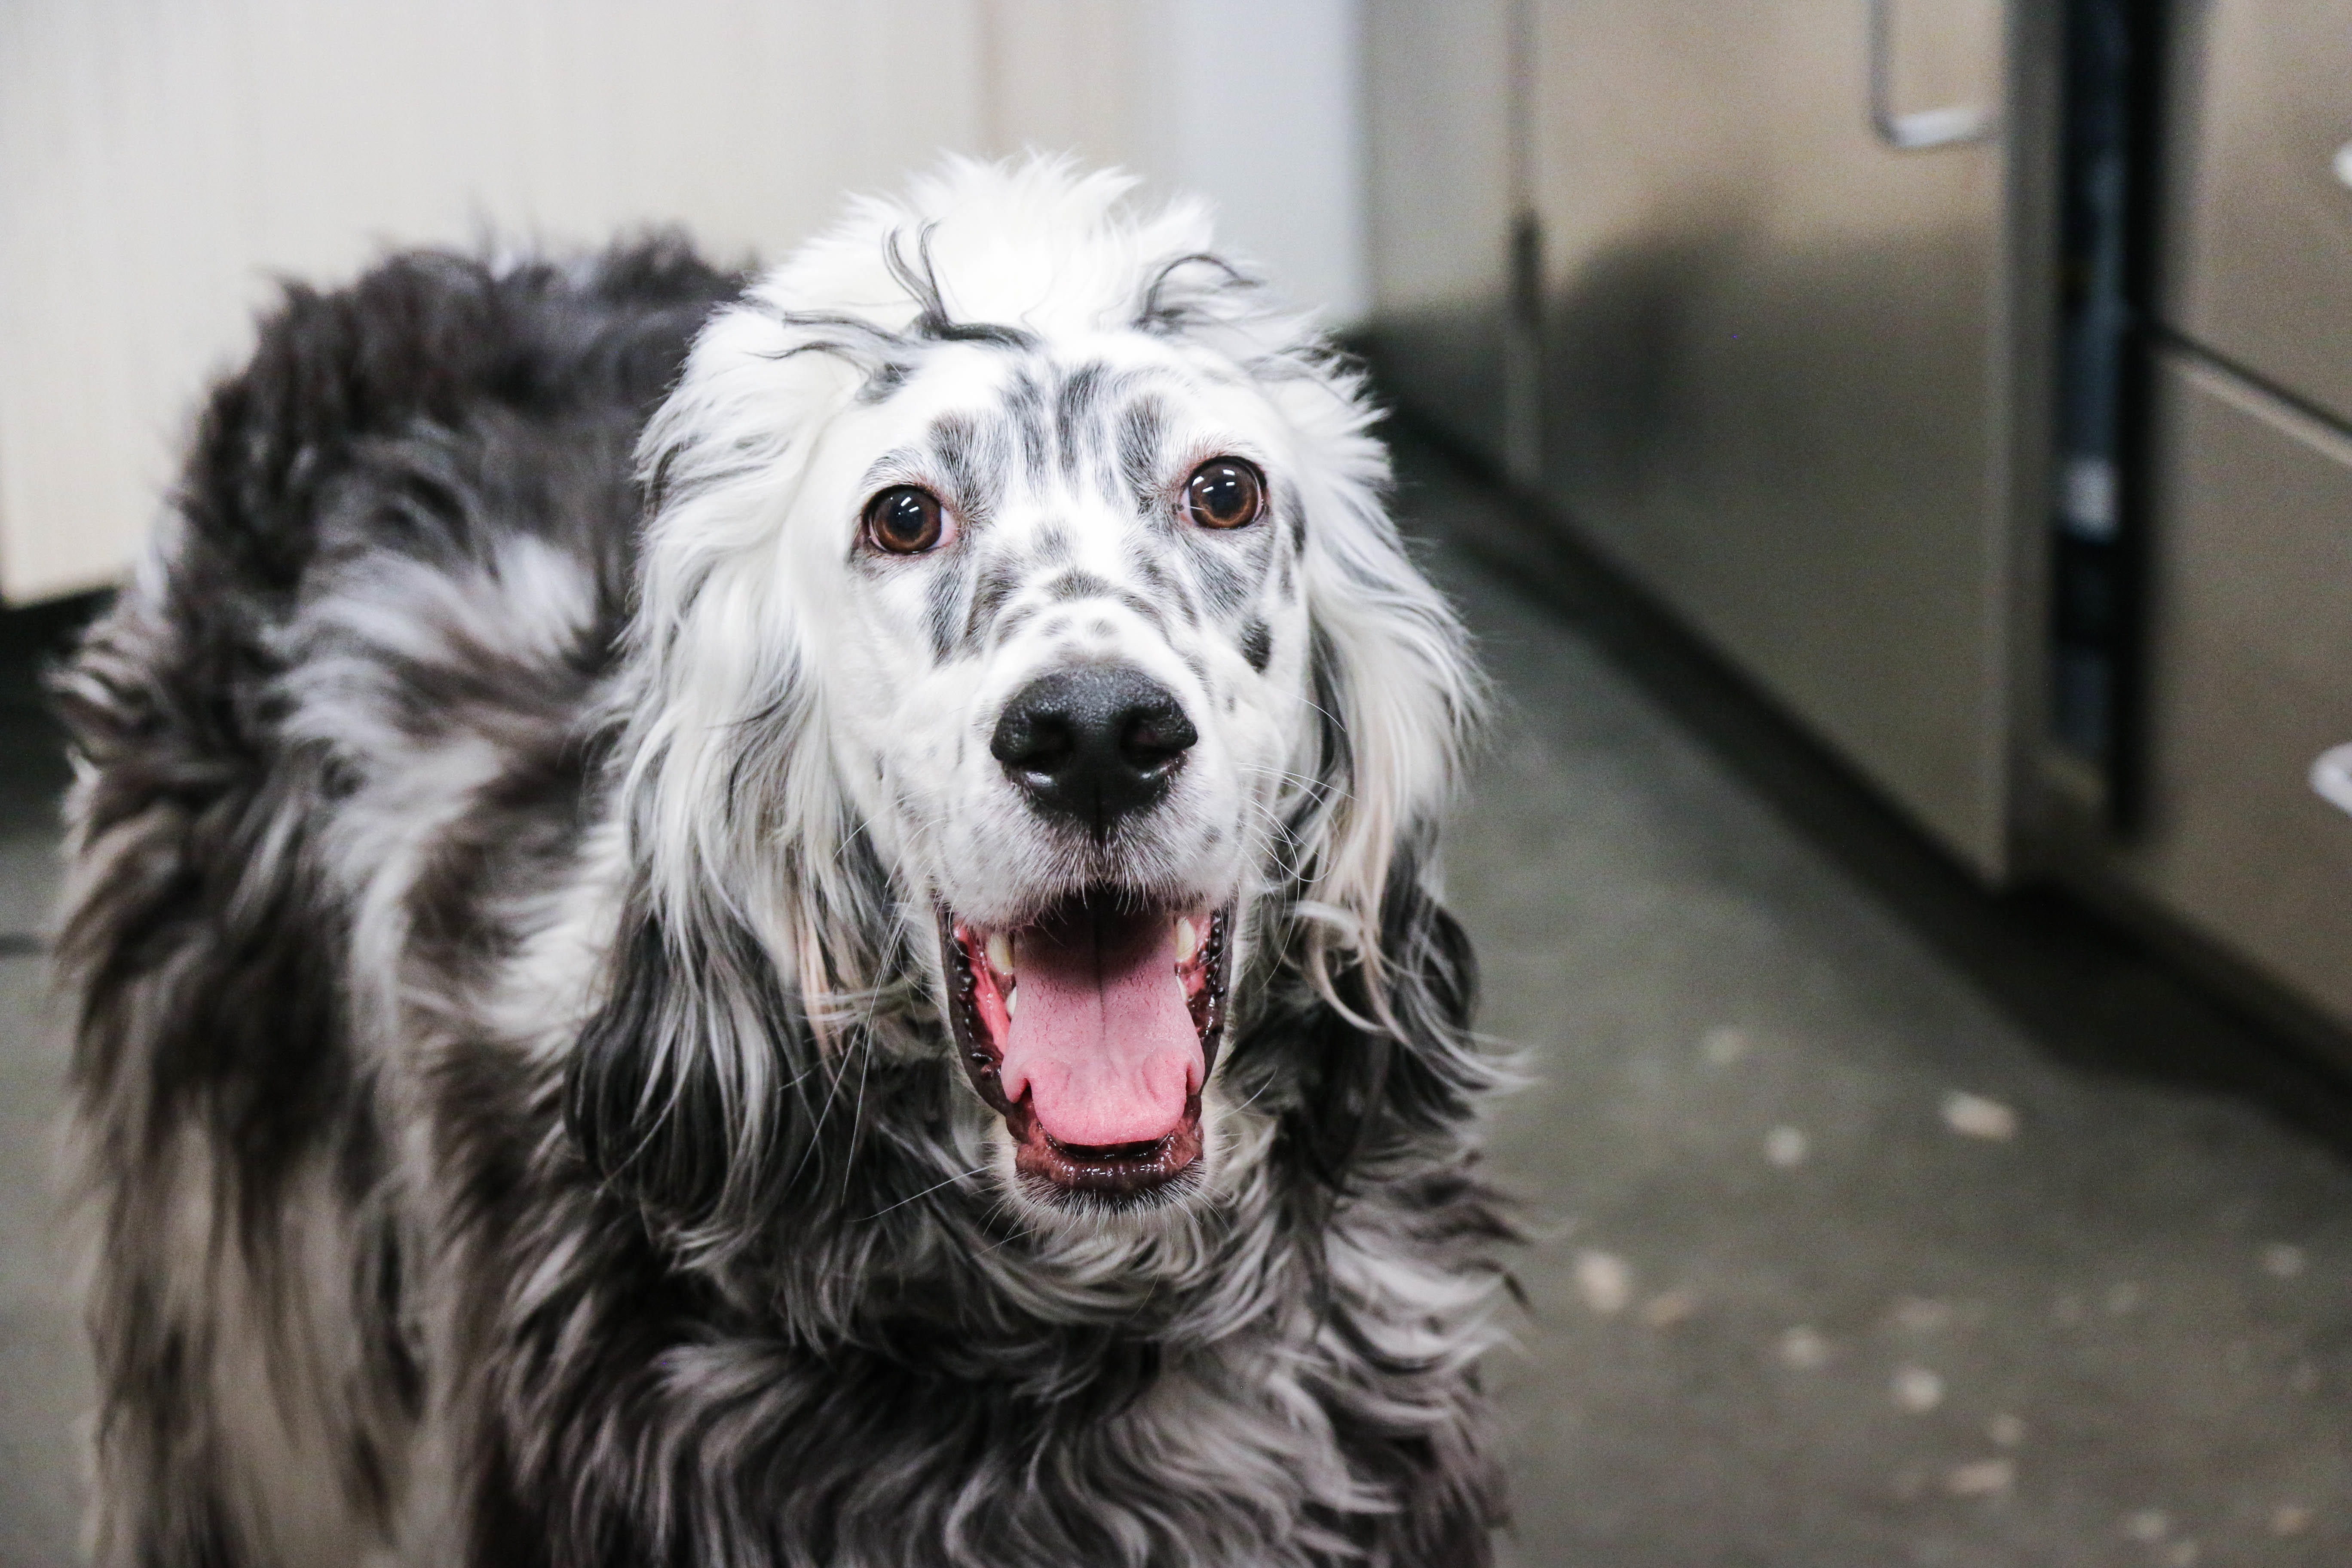 This beautiful dog is happy to be a patient at Pure Paws!